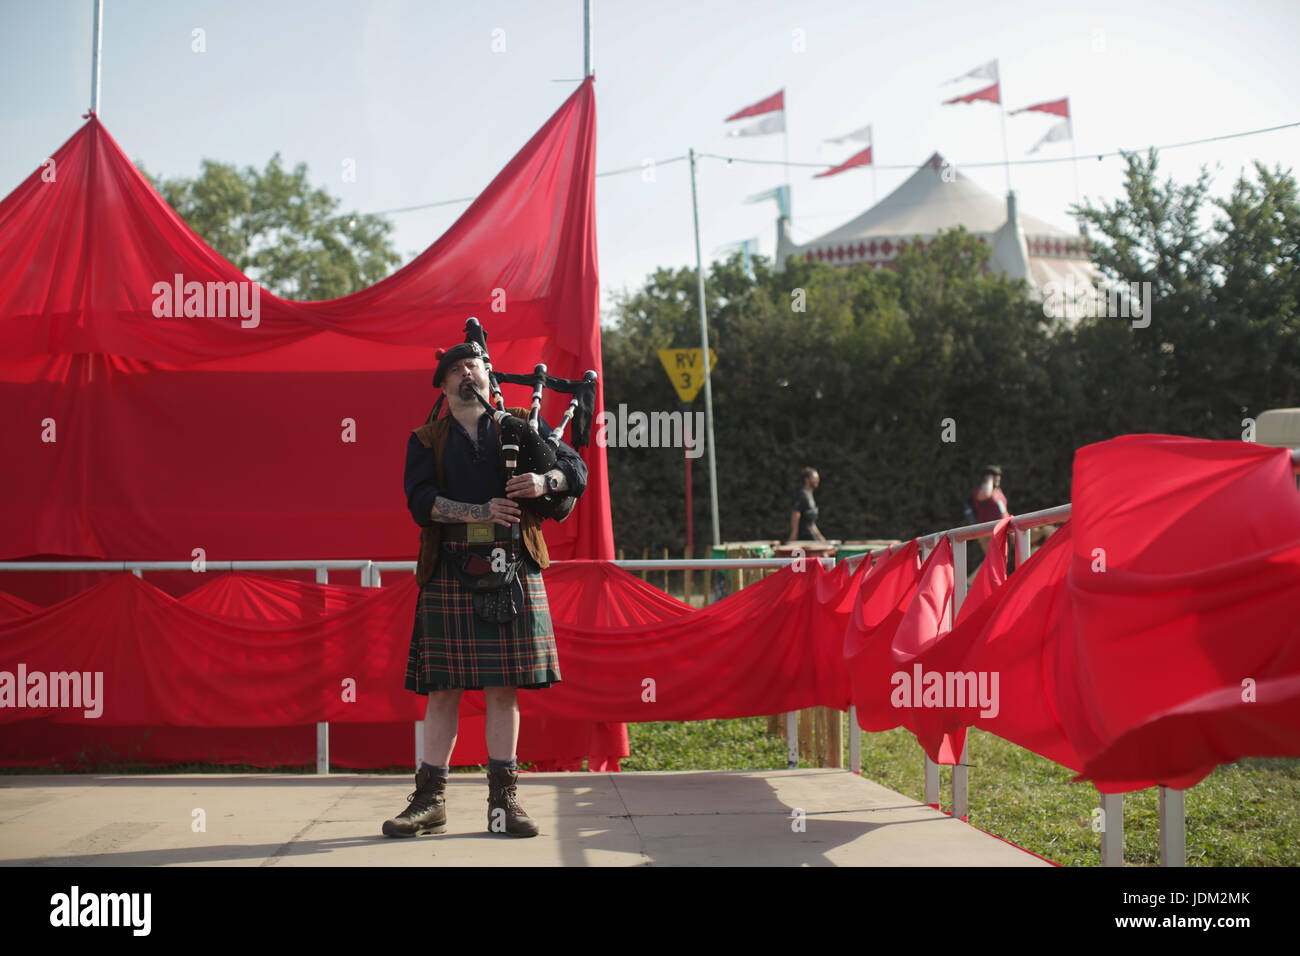 Somerset, UK. 21st June, 2017. A man playing the bagpipes on Day 1 of the 2017 Glastonbury Festival at Worthy Farm in Somerset. Photo date: Wednesday, June 21, 2017. Photo credit should read. Credit: Roger Garfield/Alamy Live News Stock Photo